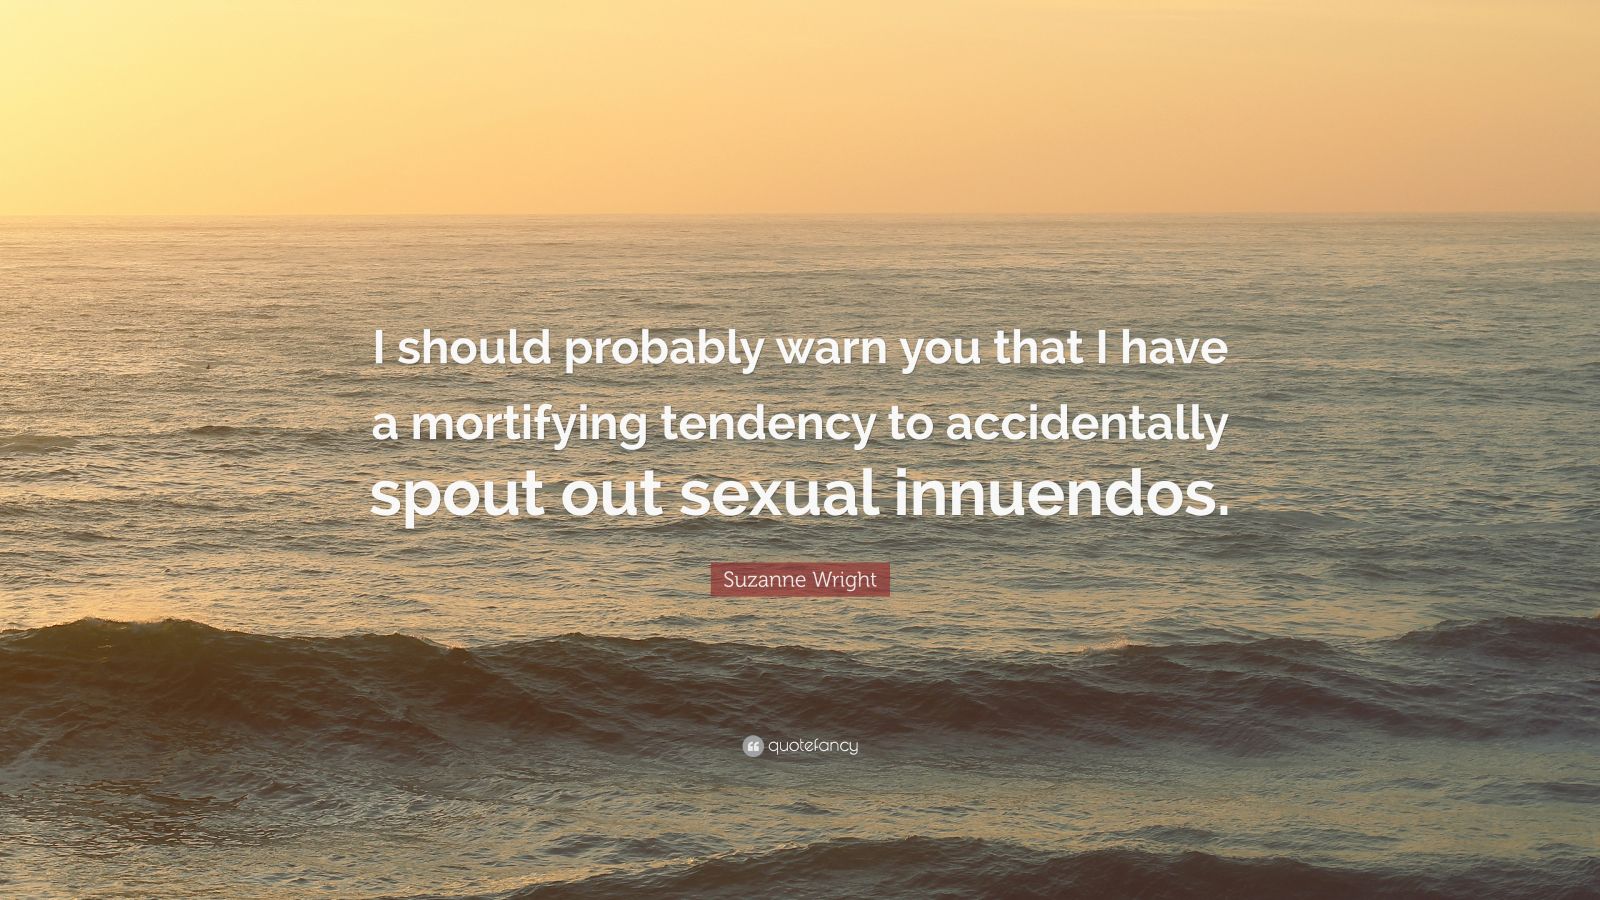 Suzanne Wright Quote “i Should Probably Warn You That I Have A Mortifying Tendency To